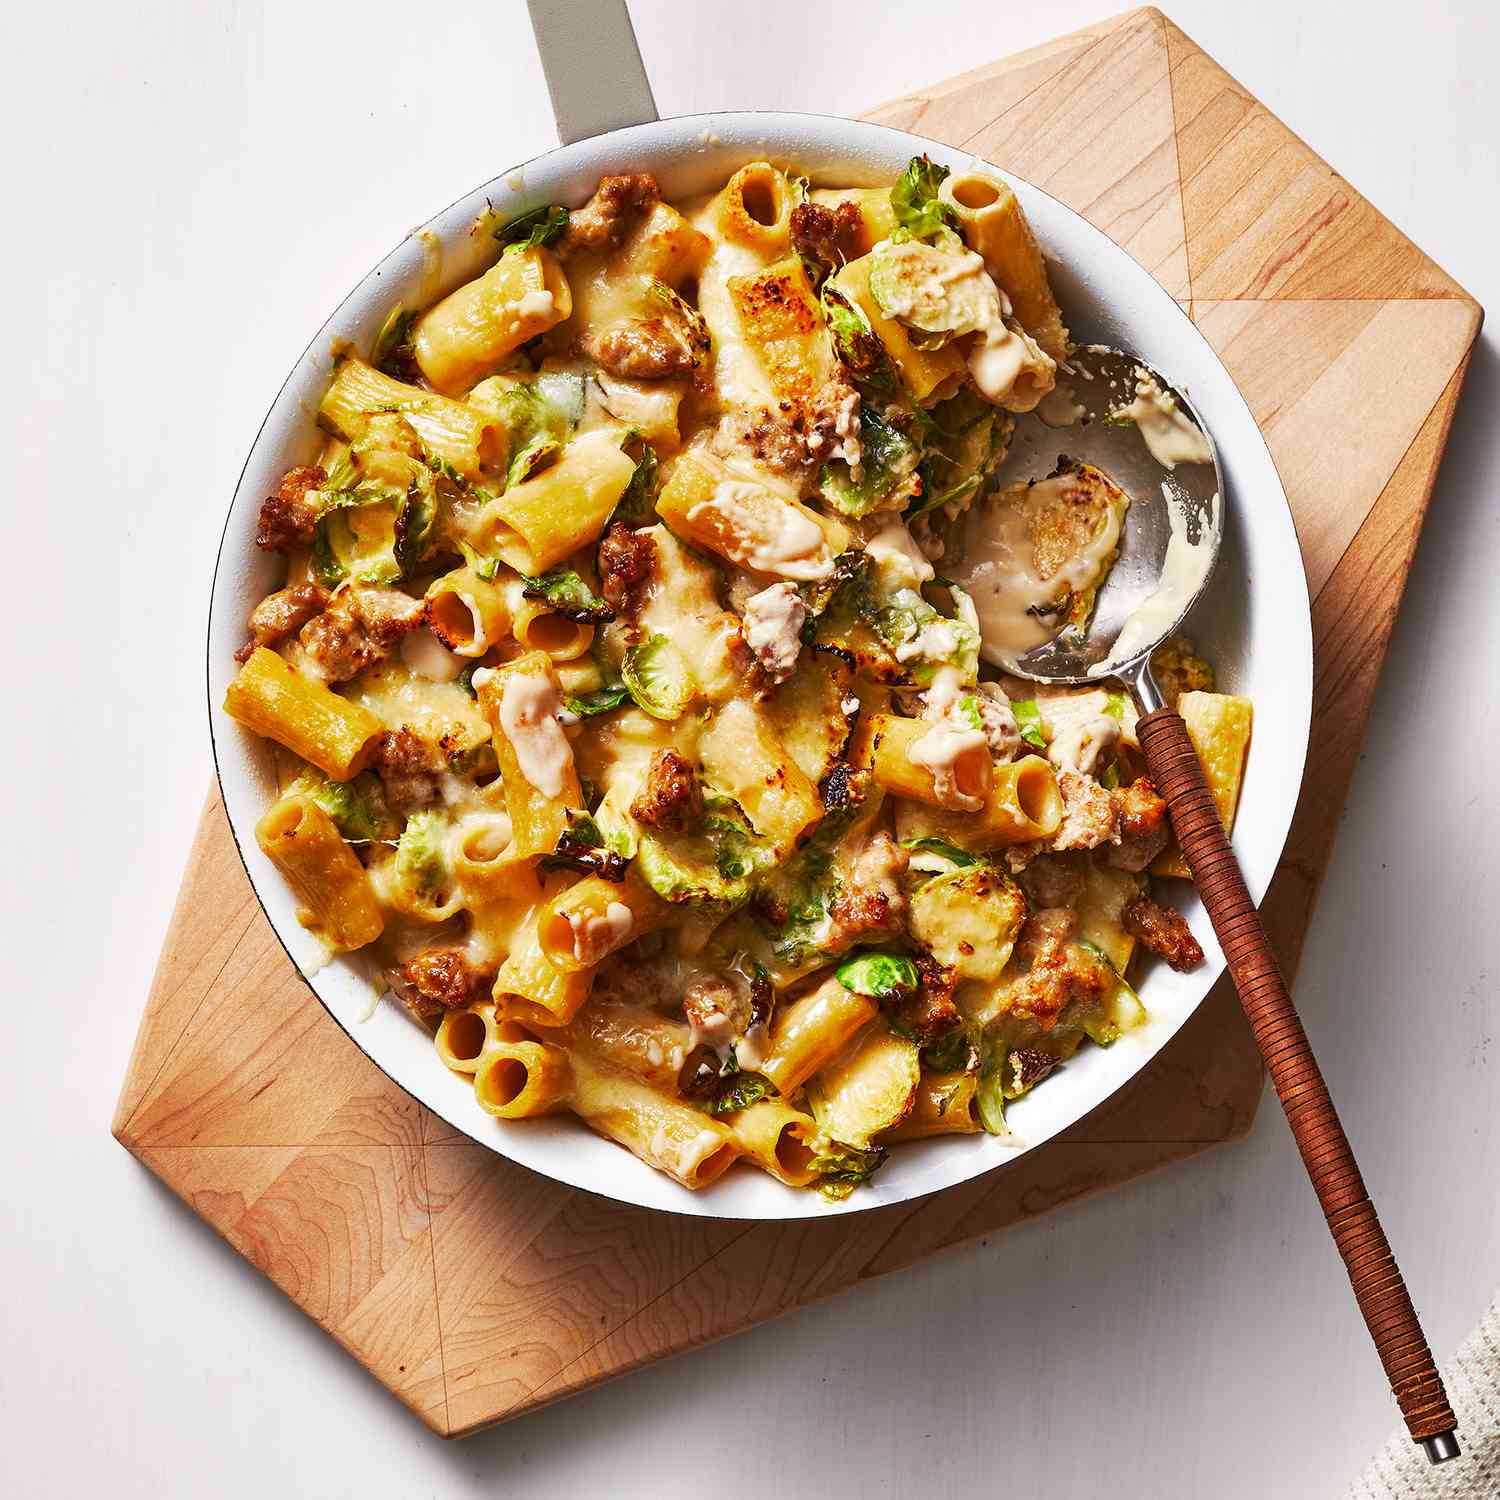 Cheesy Pasta With Sausage and Brussels Sprouts Recipe